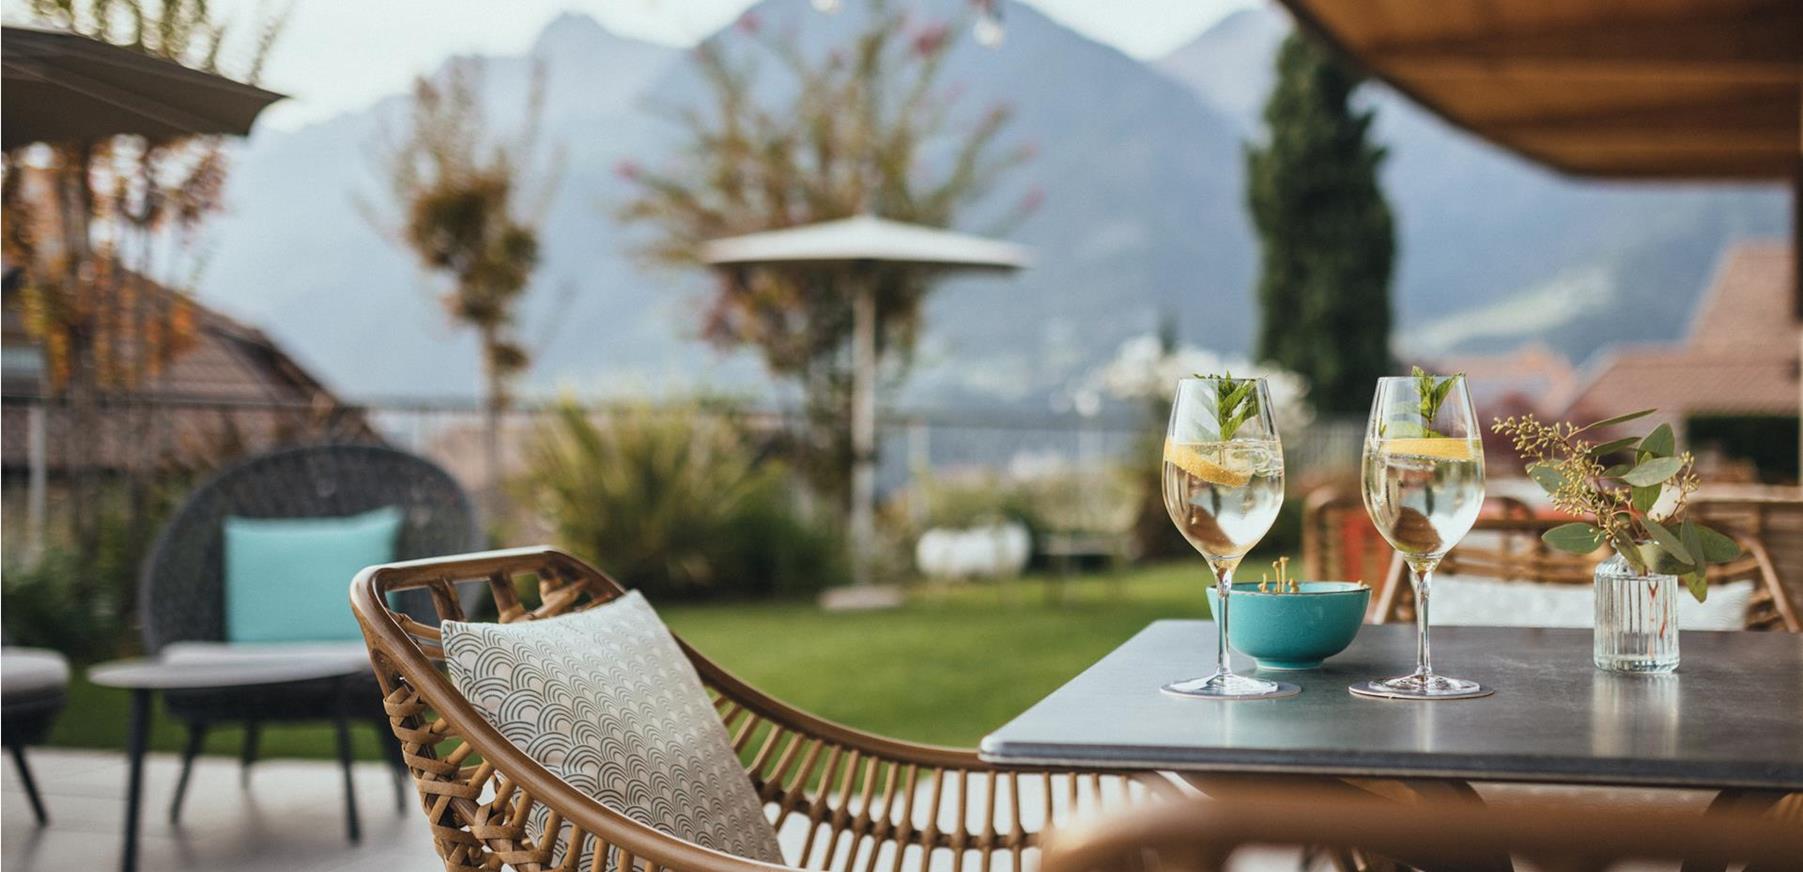 Aperitif for two on the terrace